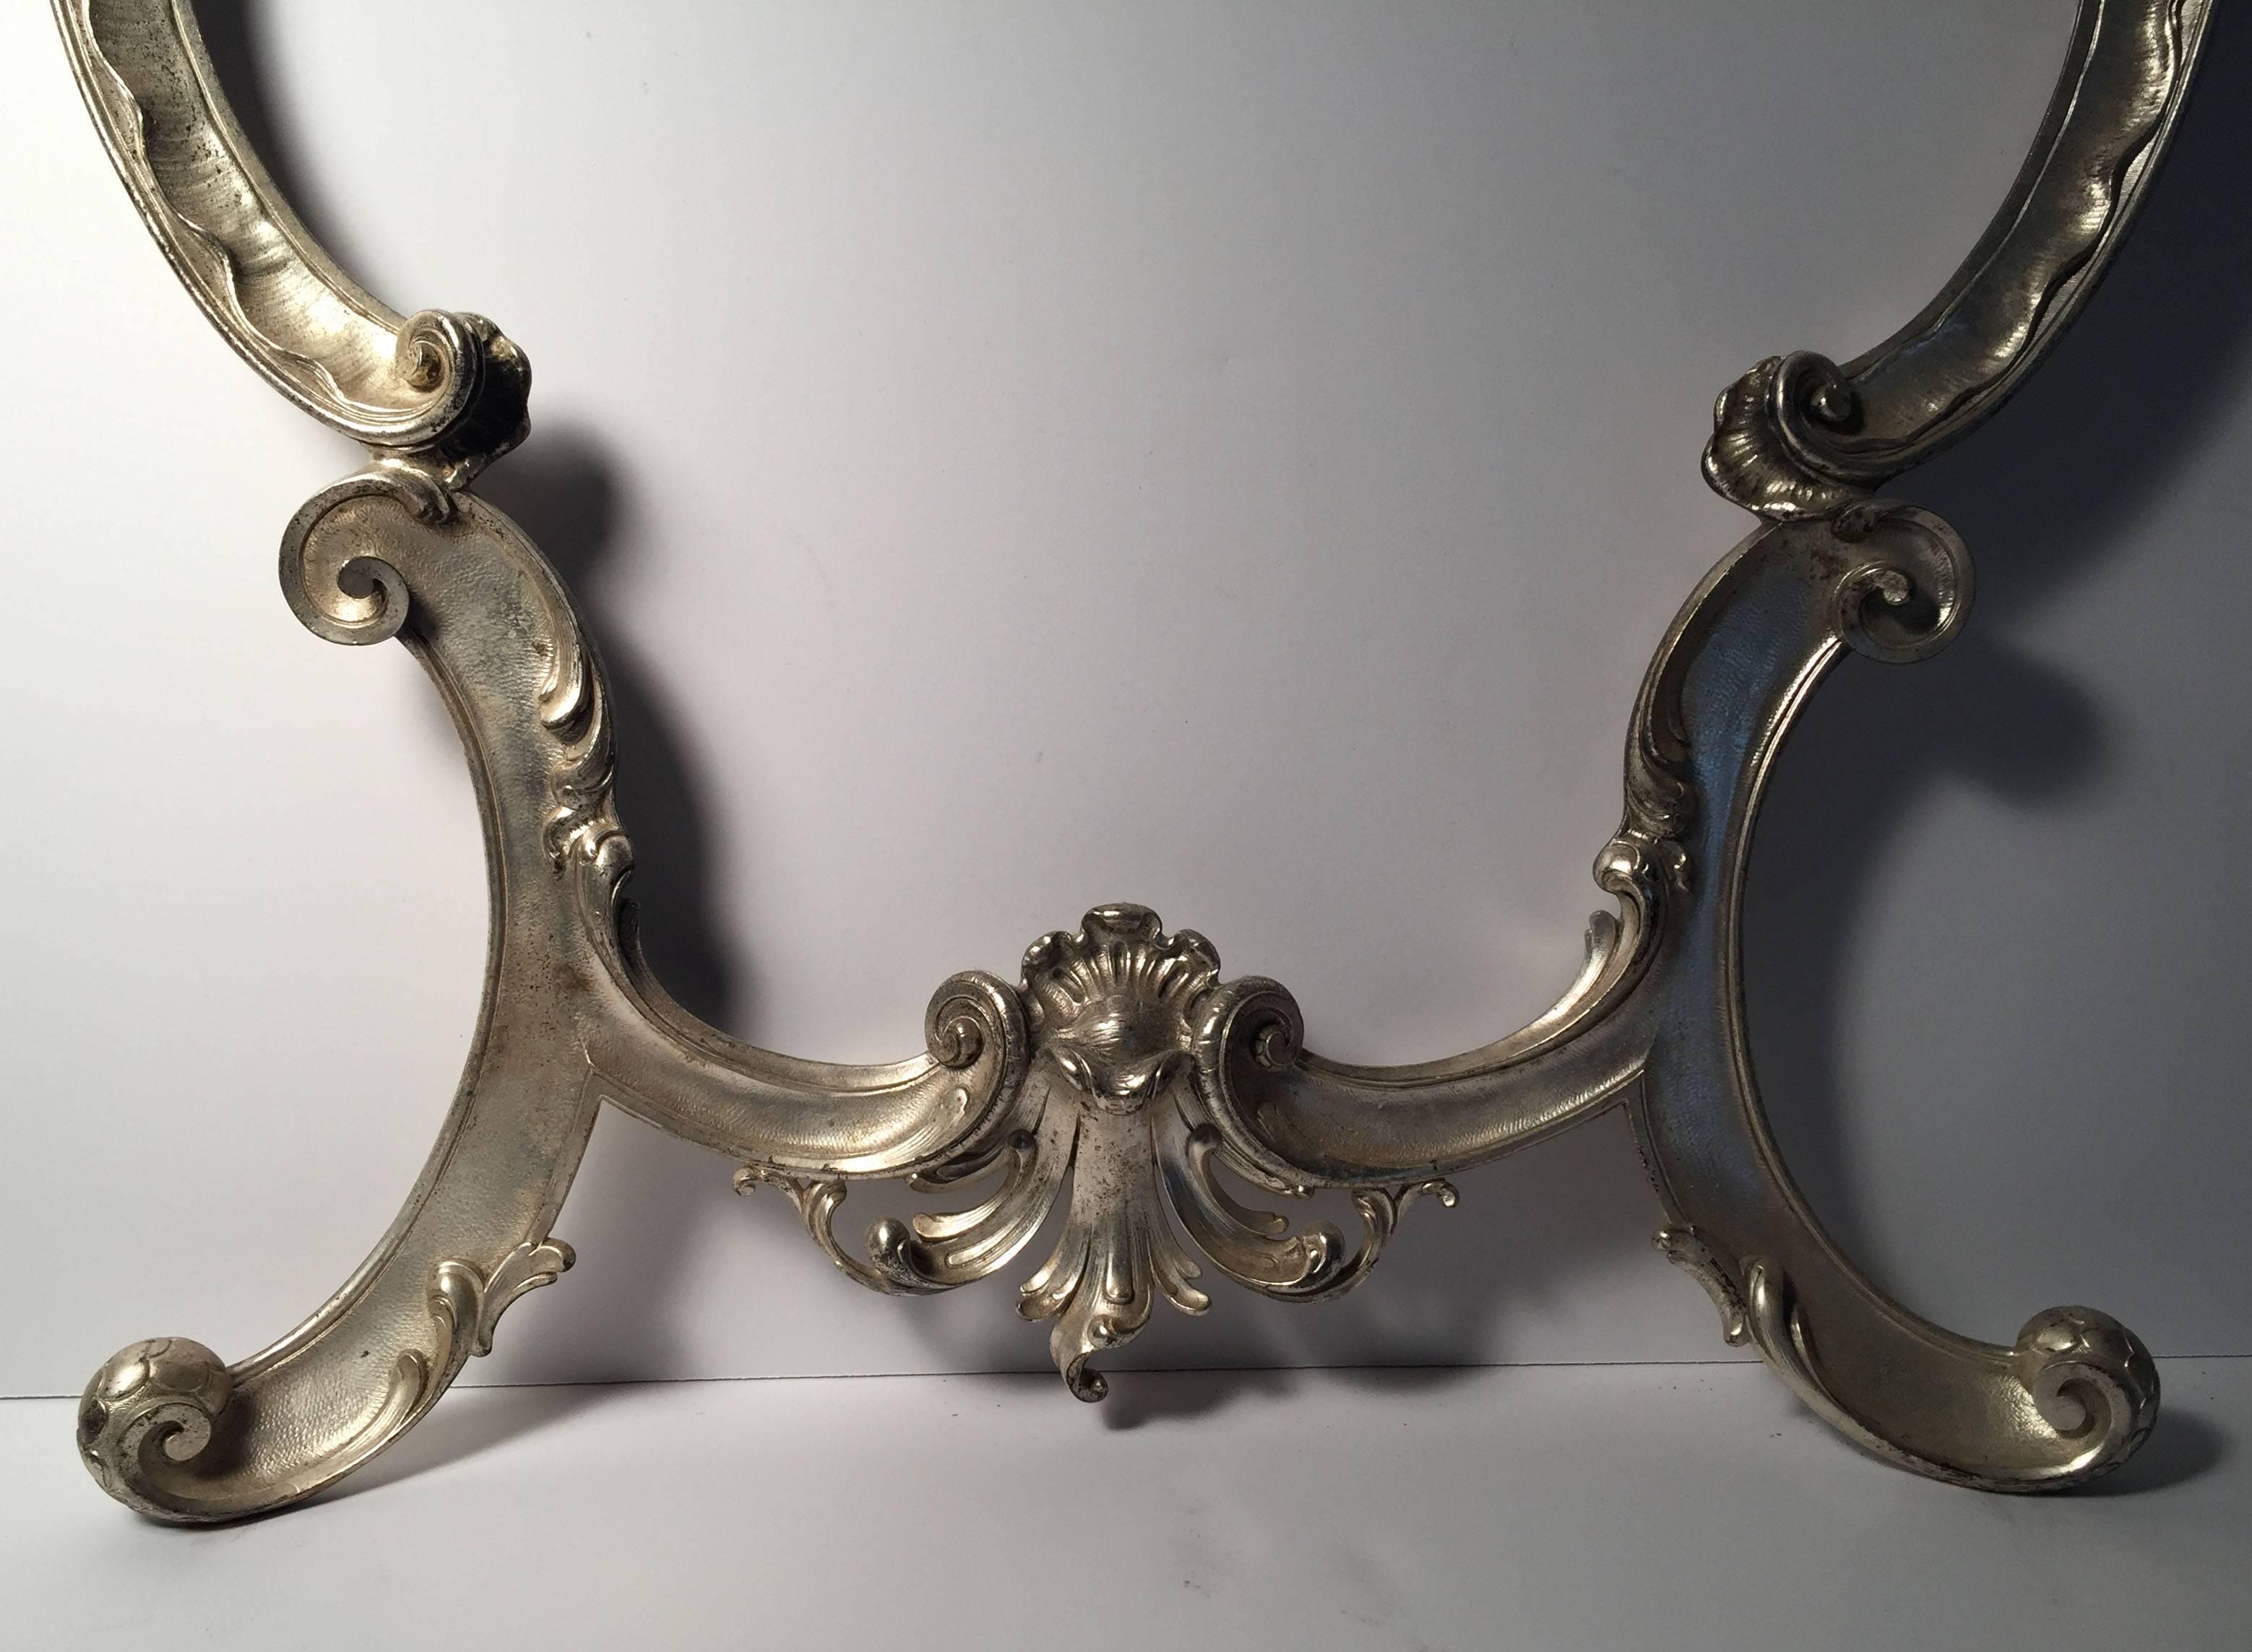 Hollywood Regency Large Italian Rococo Easel Back Table Mirror in Silver Metal In Good Condition For Sale In Chicago, IL